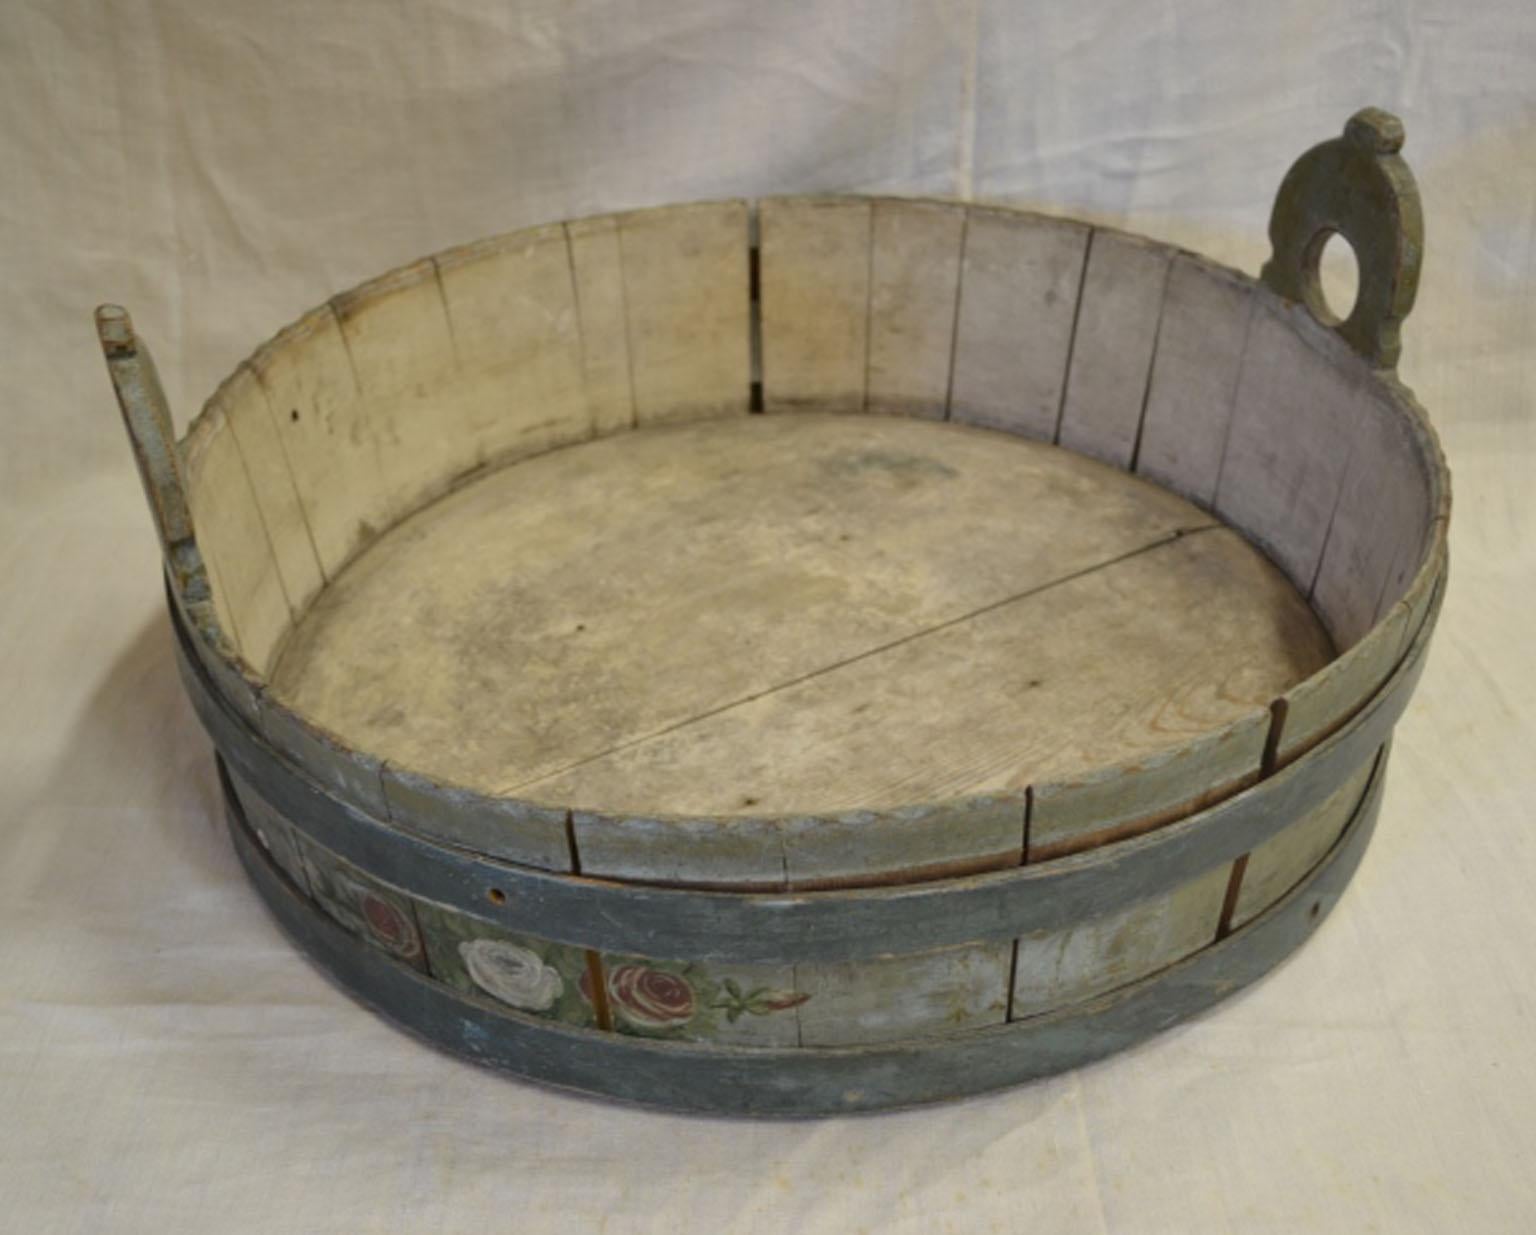 19th Century Round Painted Wood Container from Alsace In Fair Condition For Sale In Vista, CA